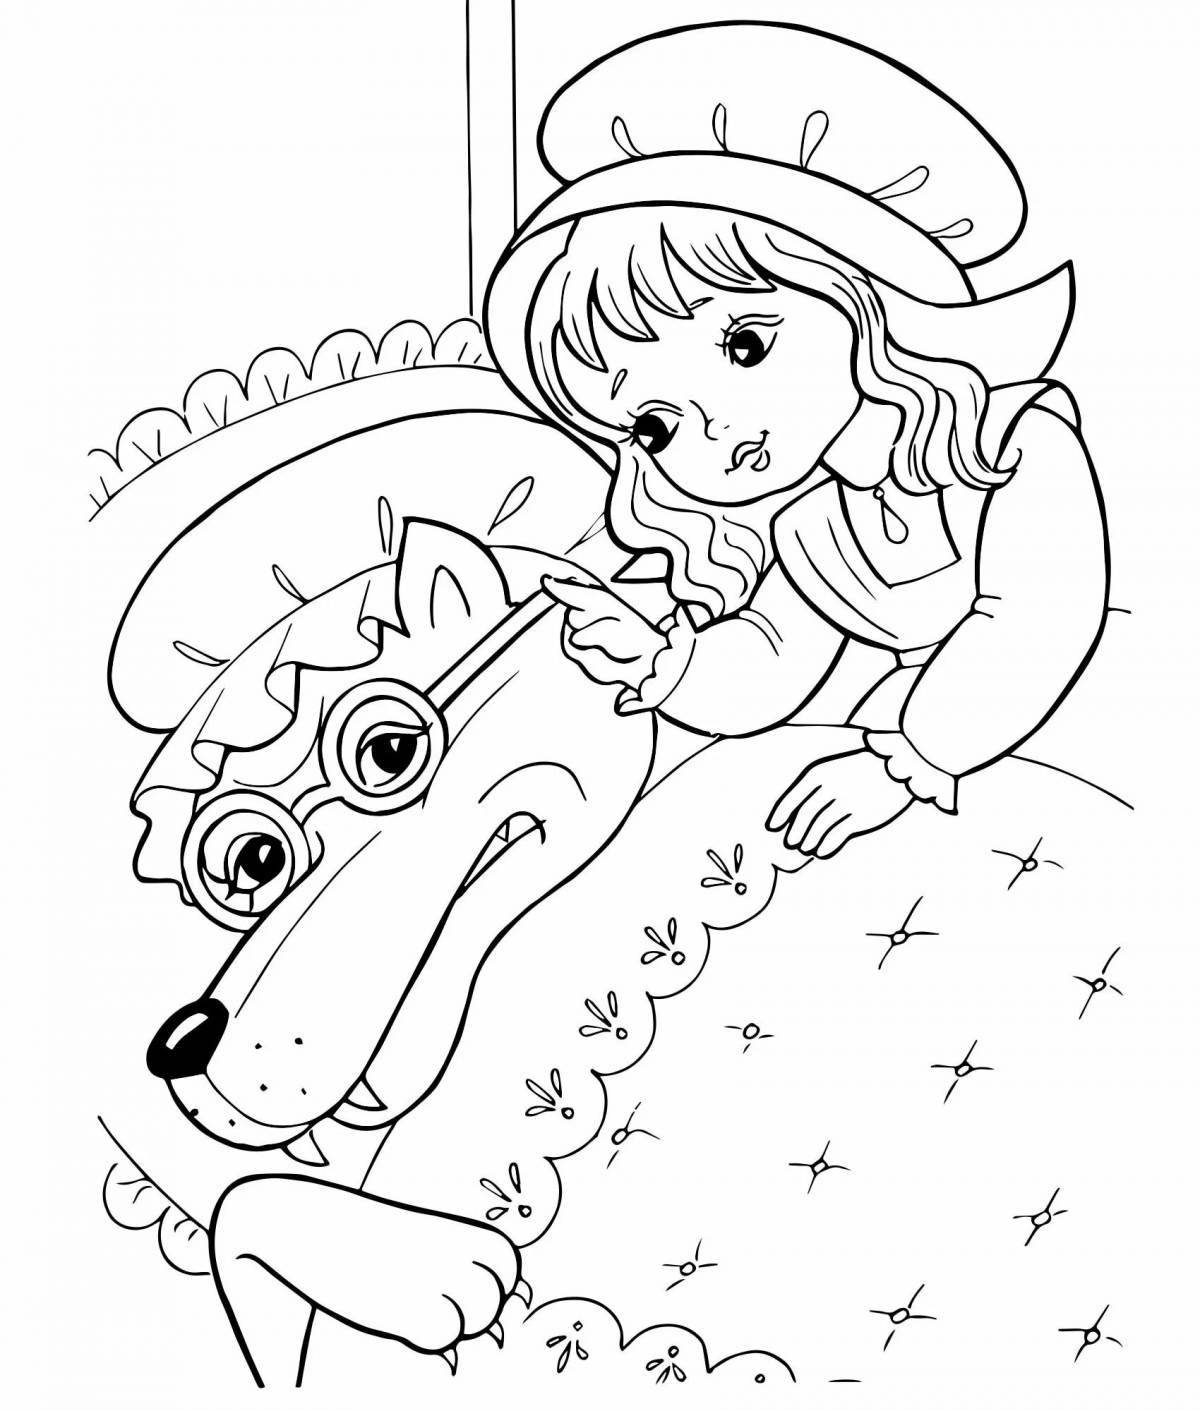 Coloring page enthusiastic little red riding hood